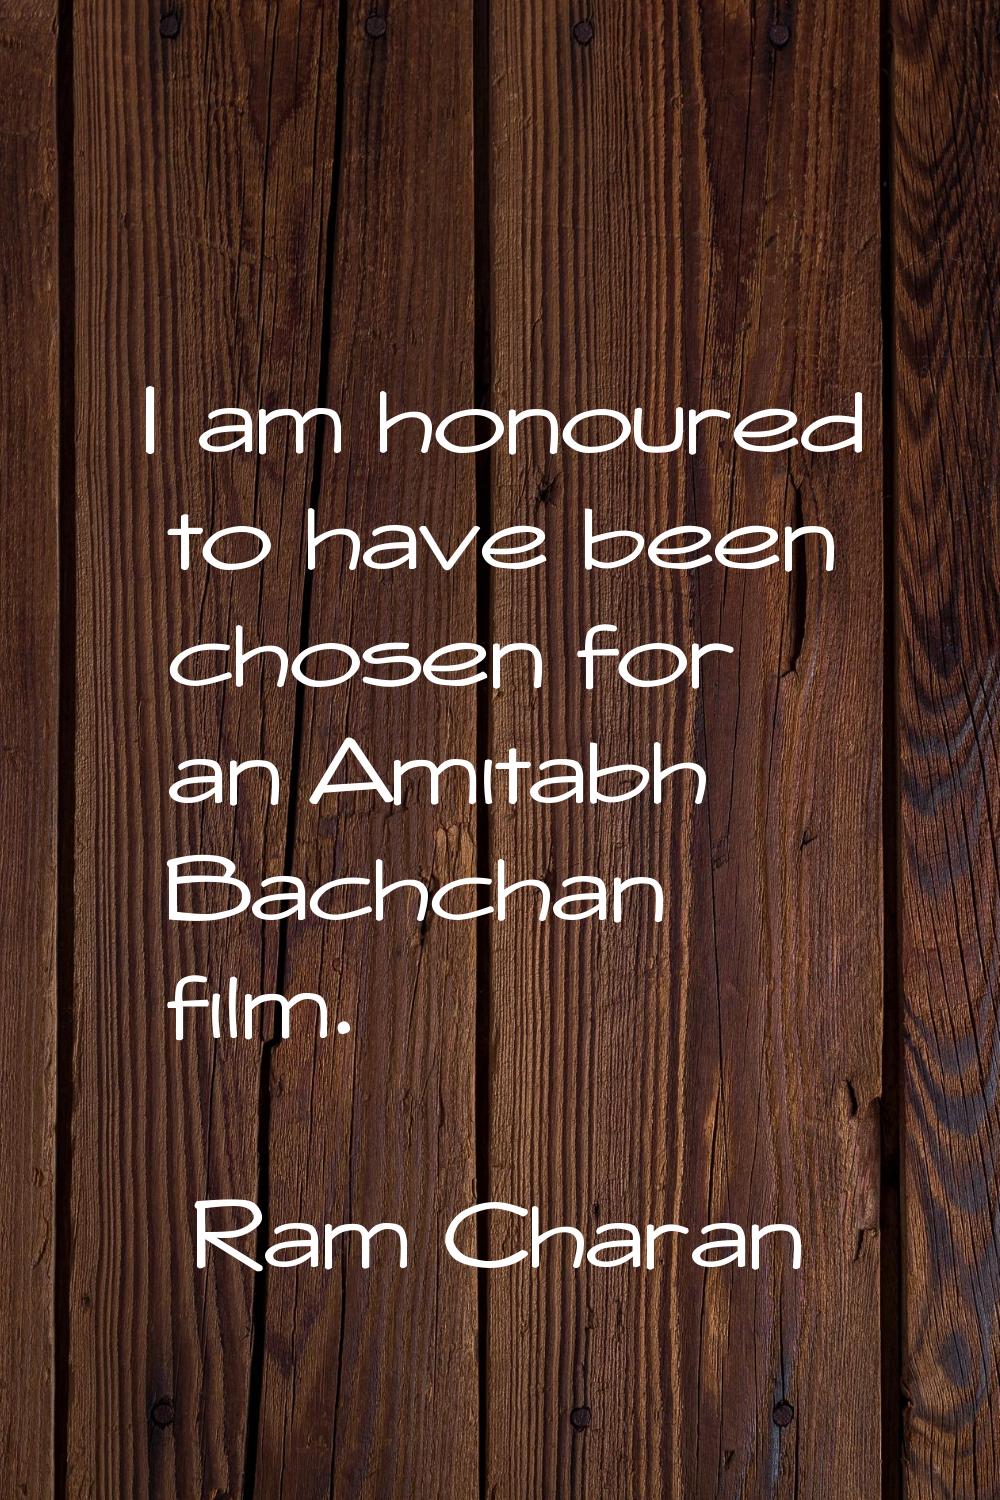 I am honoured to have been chosen for an Amitabh Bachchan film.